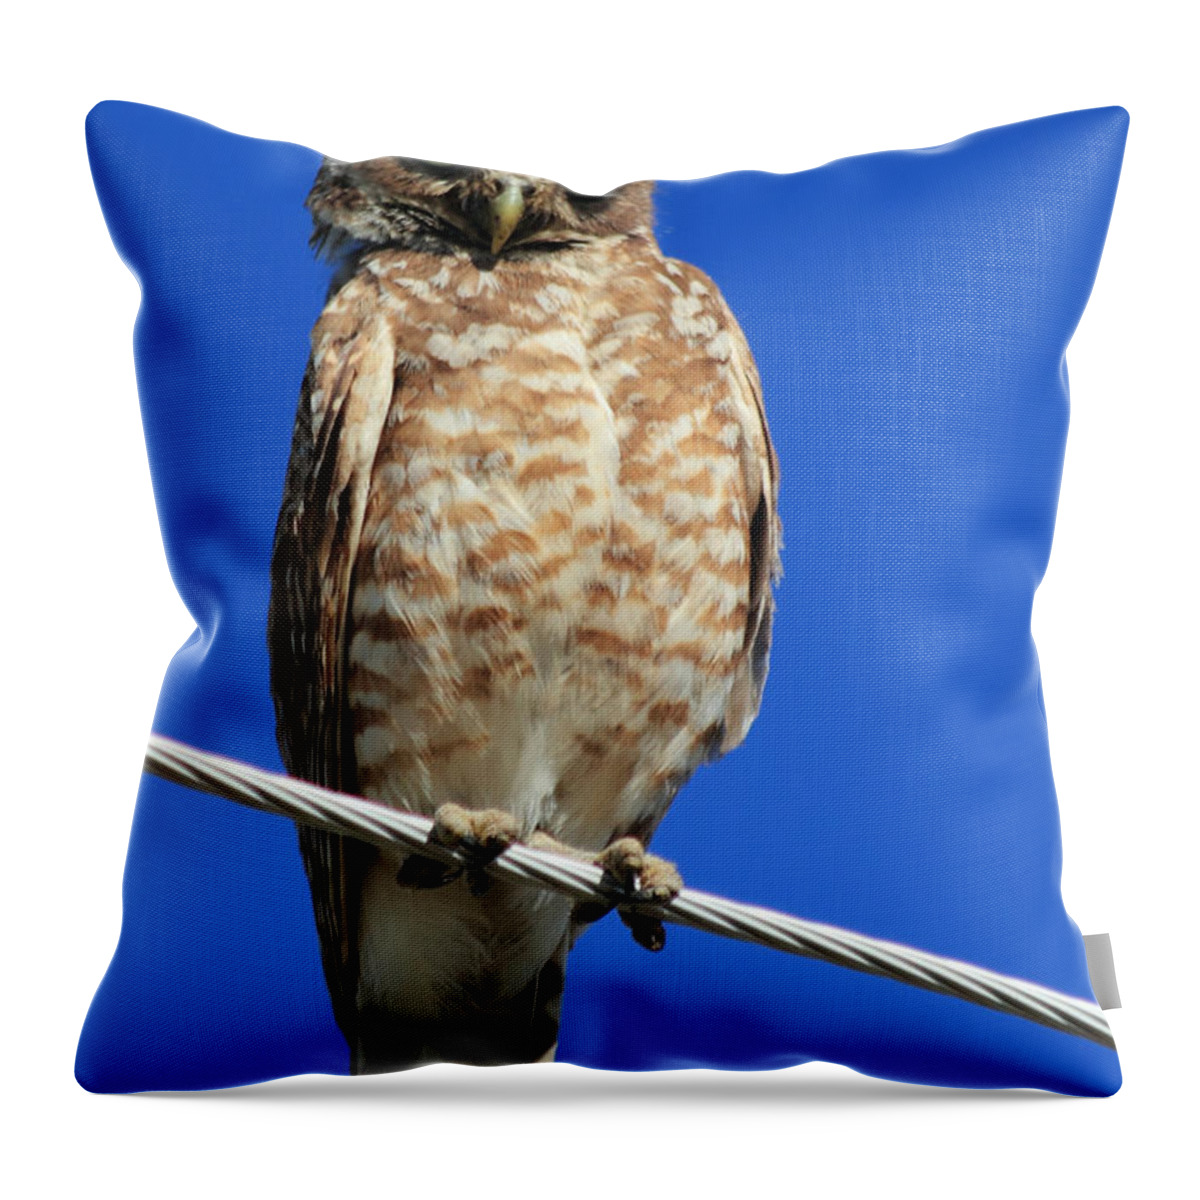 Owl Throw Pillow featuring the photograph Wink by Shane Bechler